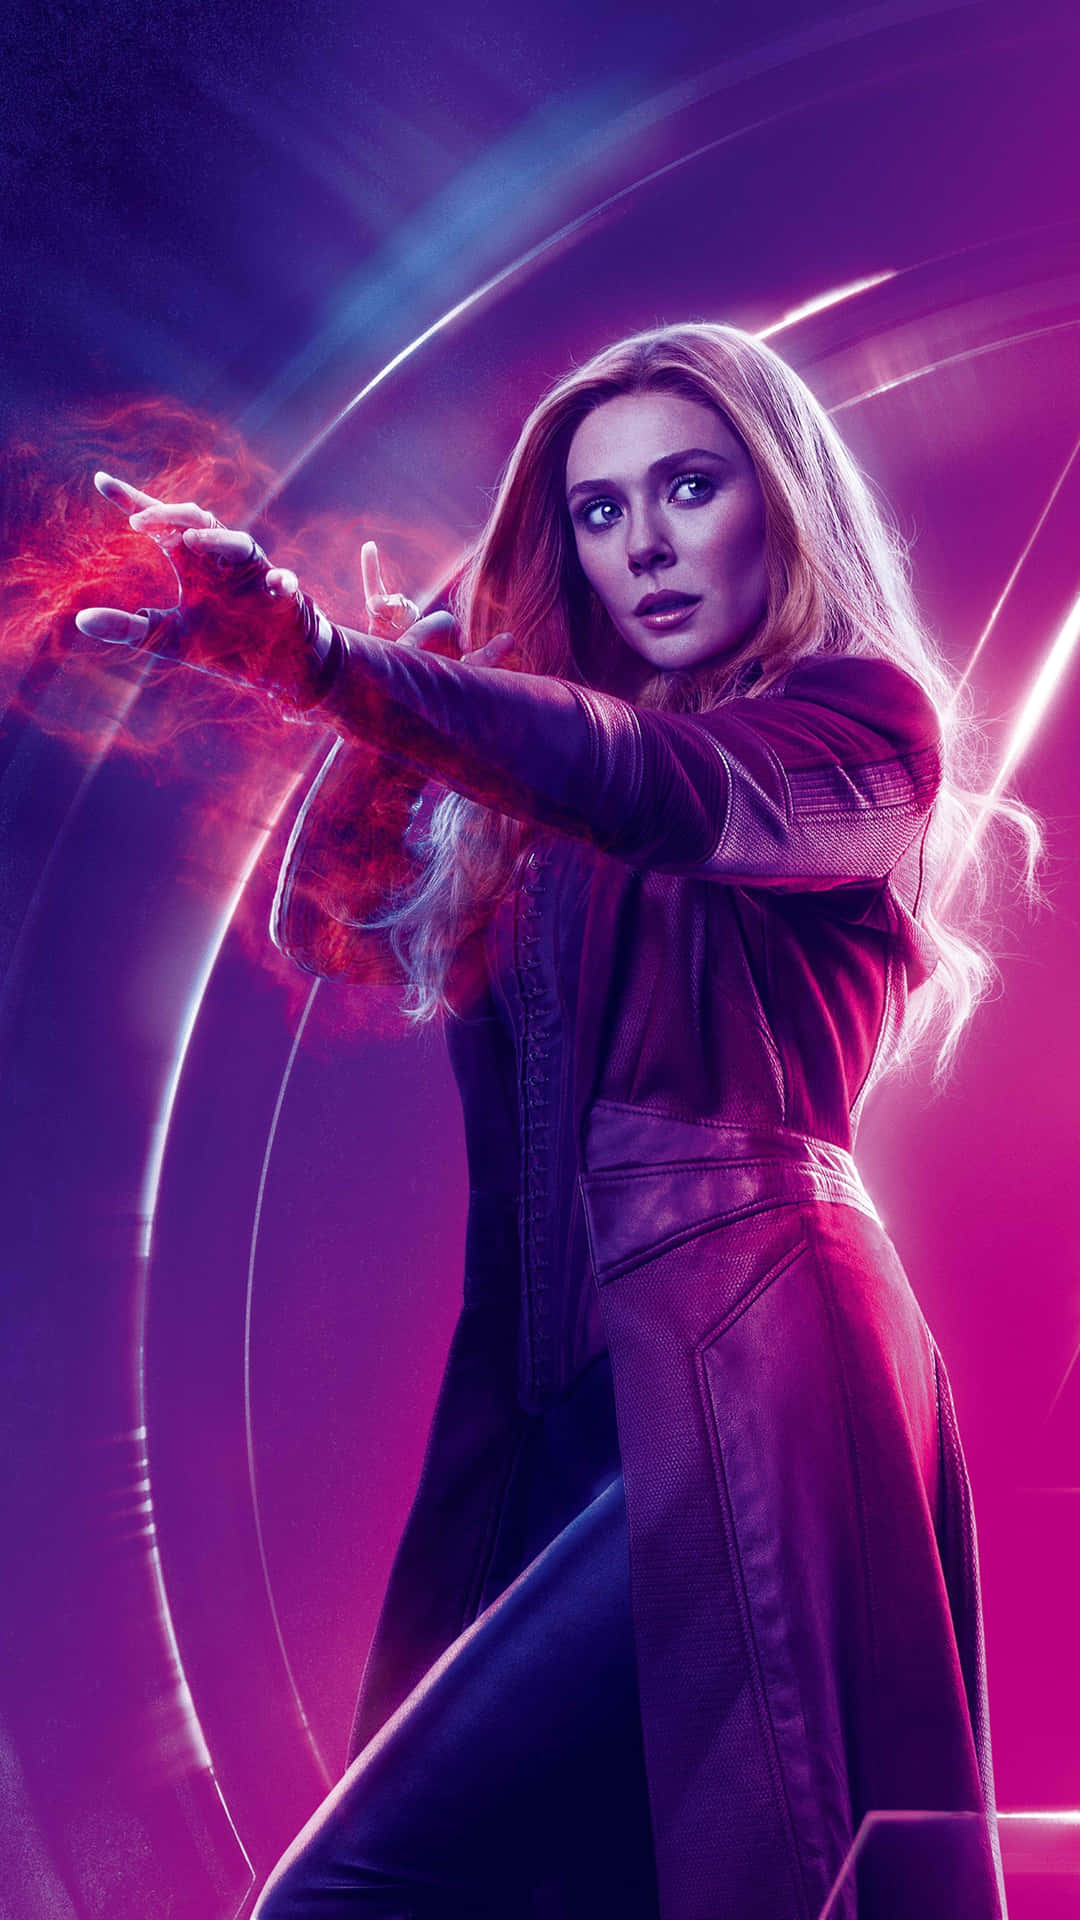 Scarlet Witch as seen in the Marvel Cinematic Universe in 8k resolution Wallpaper